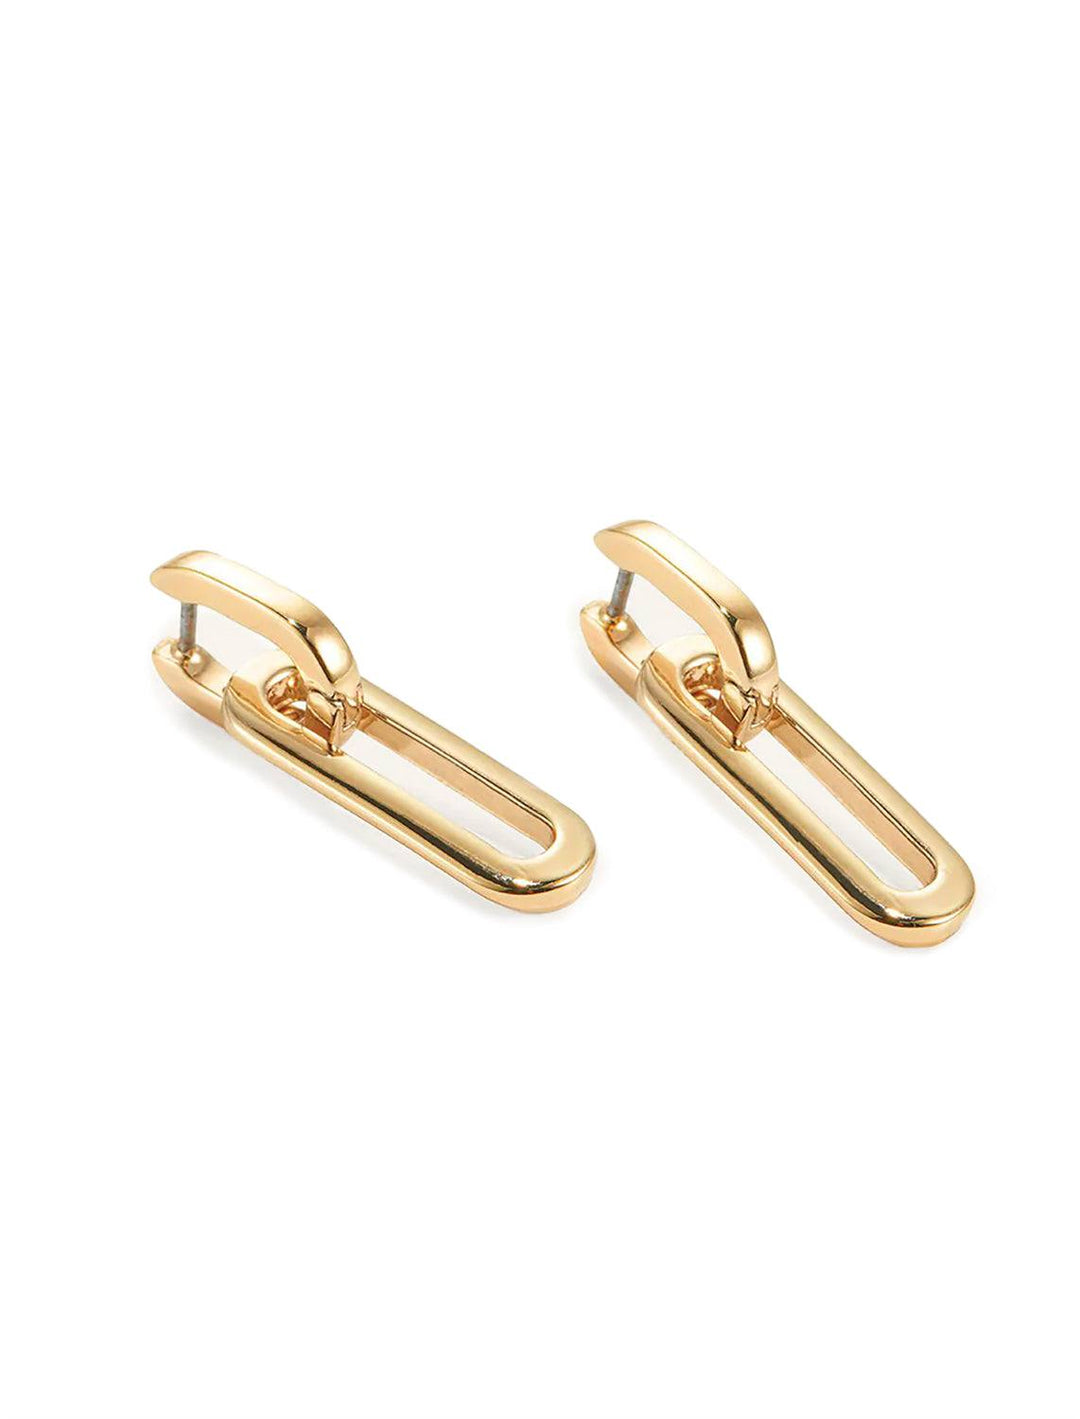 Side angle view of Jenny Bird's Teeni Detachable Link Earrings in Gold Tone Dipped Brass.